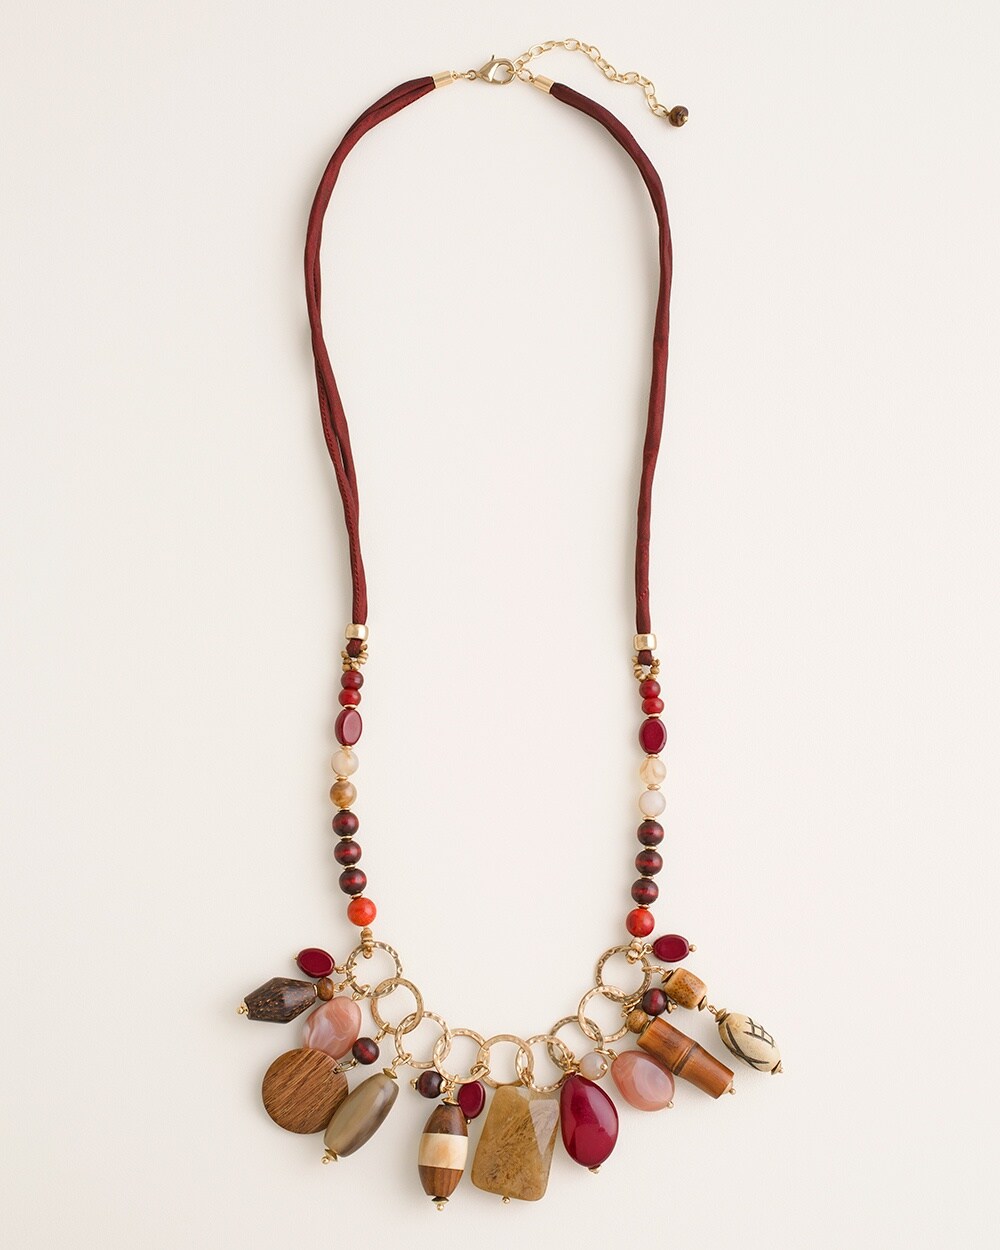 Cherry-Colored Charm Necklace